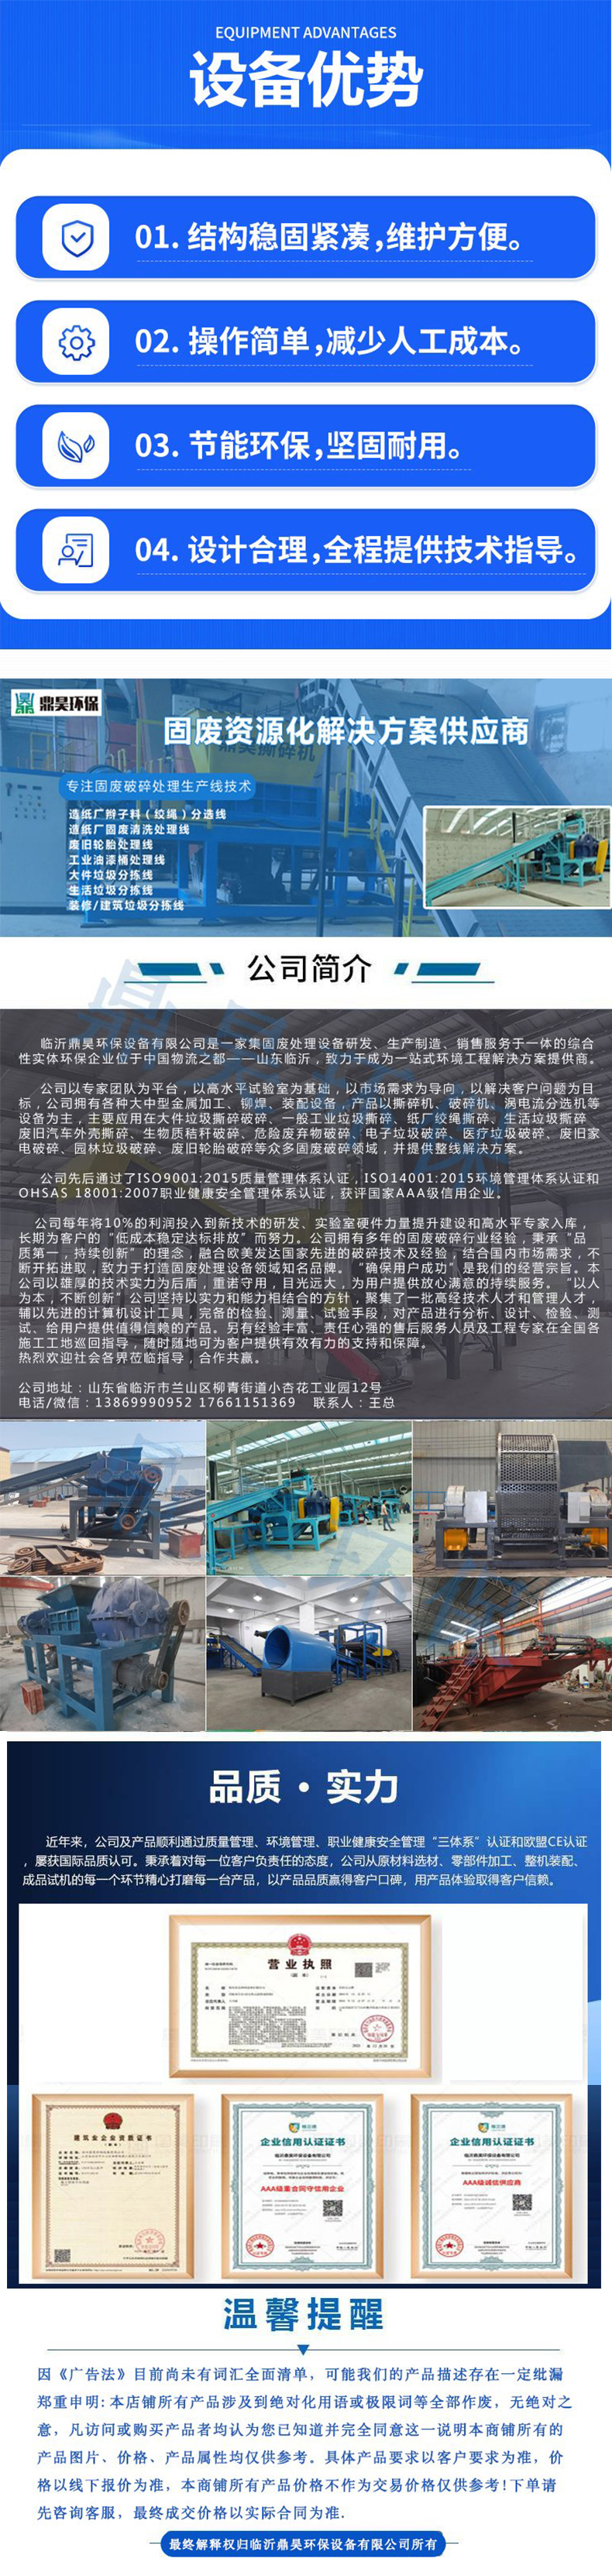 Dinghao Environmental Protection Single Axis Shredder Leather Scrap Fabric Old Clothes Textile Fabrics Clothing Factory Waste Shredding